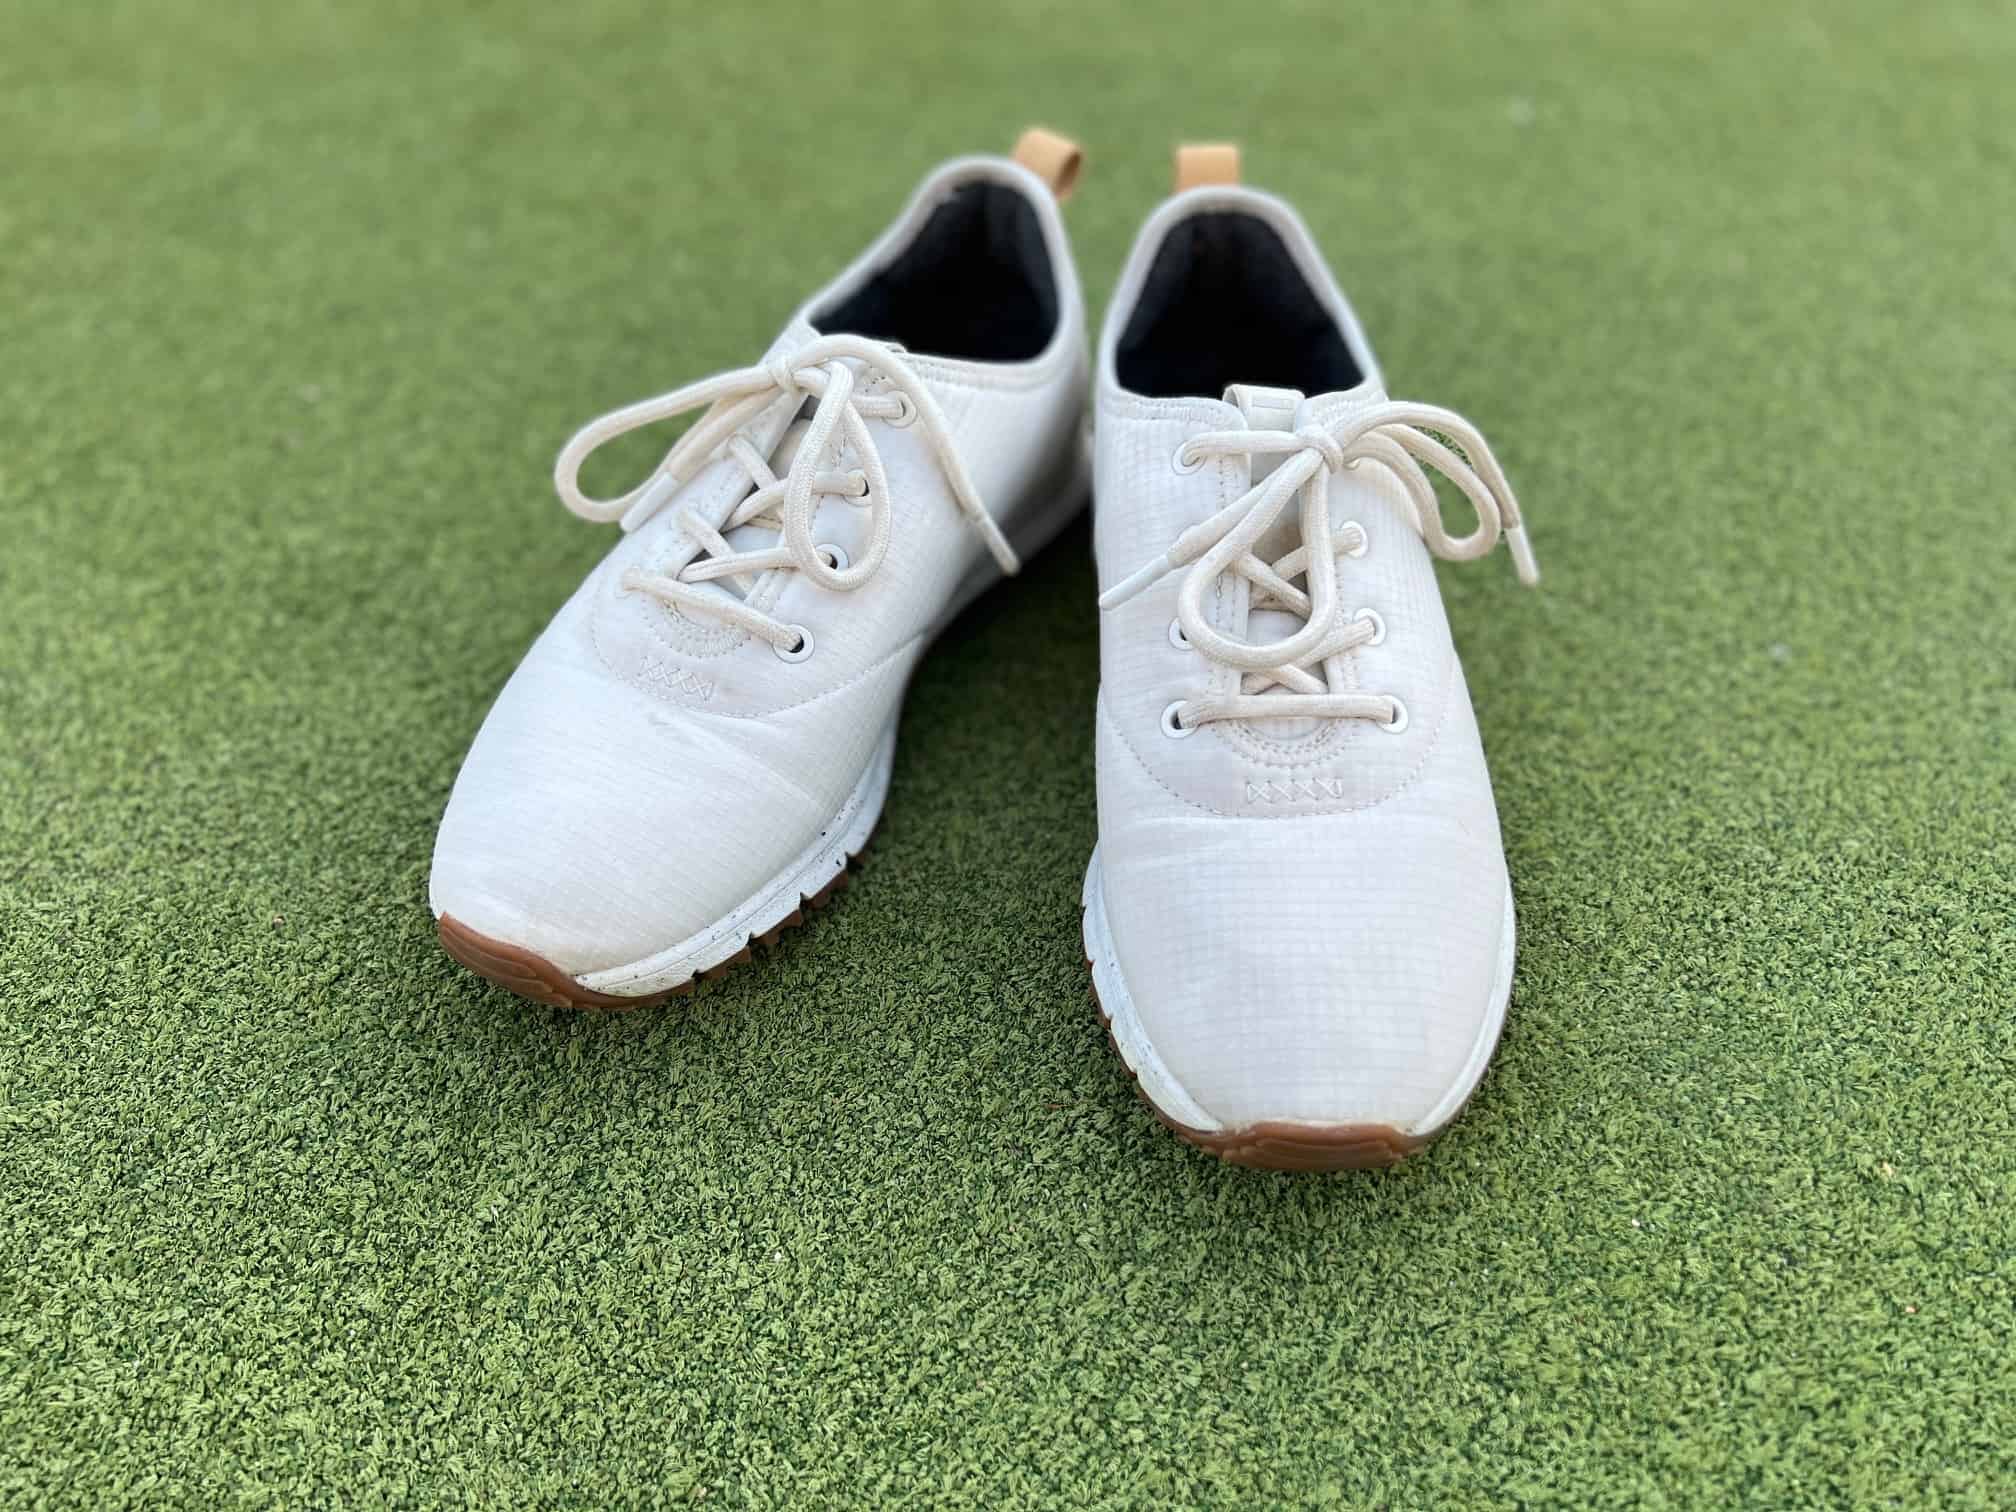 TRUE All Day Ripstop Golf Shoes Review - Independent Golf Reviews